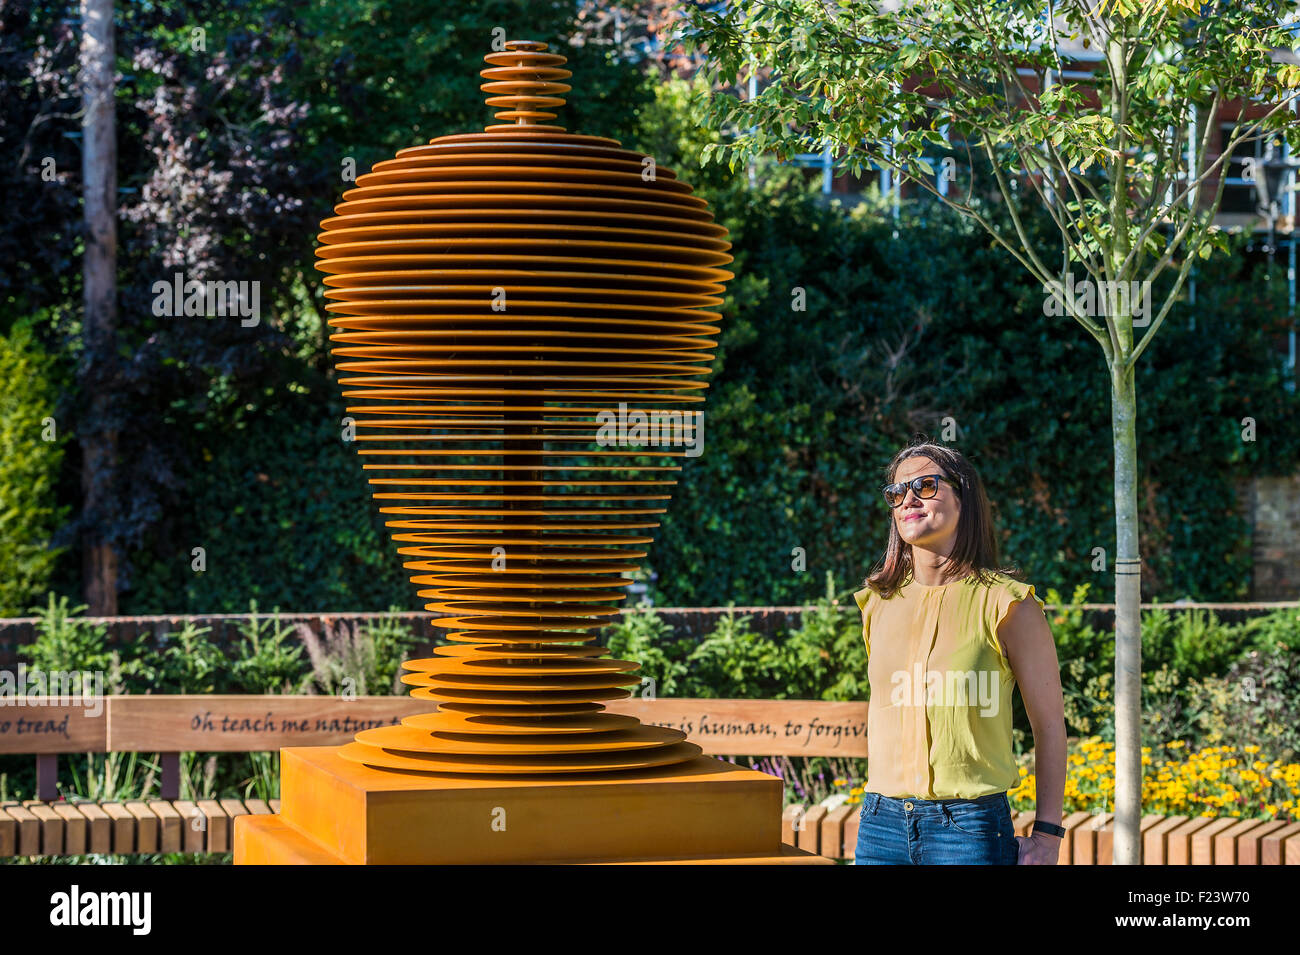 Twickenham, London, UK. 10th September, 2015. The new Pope’s Urn is based on a long-lost original and has been designed by award-winning architects Feilden Clegg Bradley Studios to celebrate Alexander Pope (1688-1744) one of England’s greatest poets, and Twickenham’s most famous resident. Standing just over eight-foot high, this stylish contemporary sculpture mirrors the shape of the original urn, and is a reminder of the poet’s great contributions to garden and landscape design. Credit:  Guy Bell/Alamy Live News Stock Photo